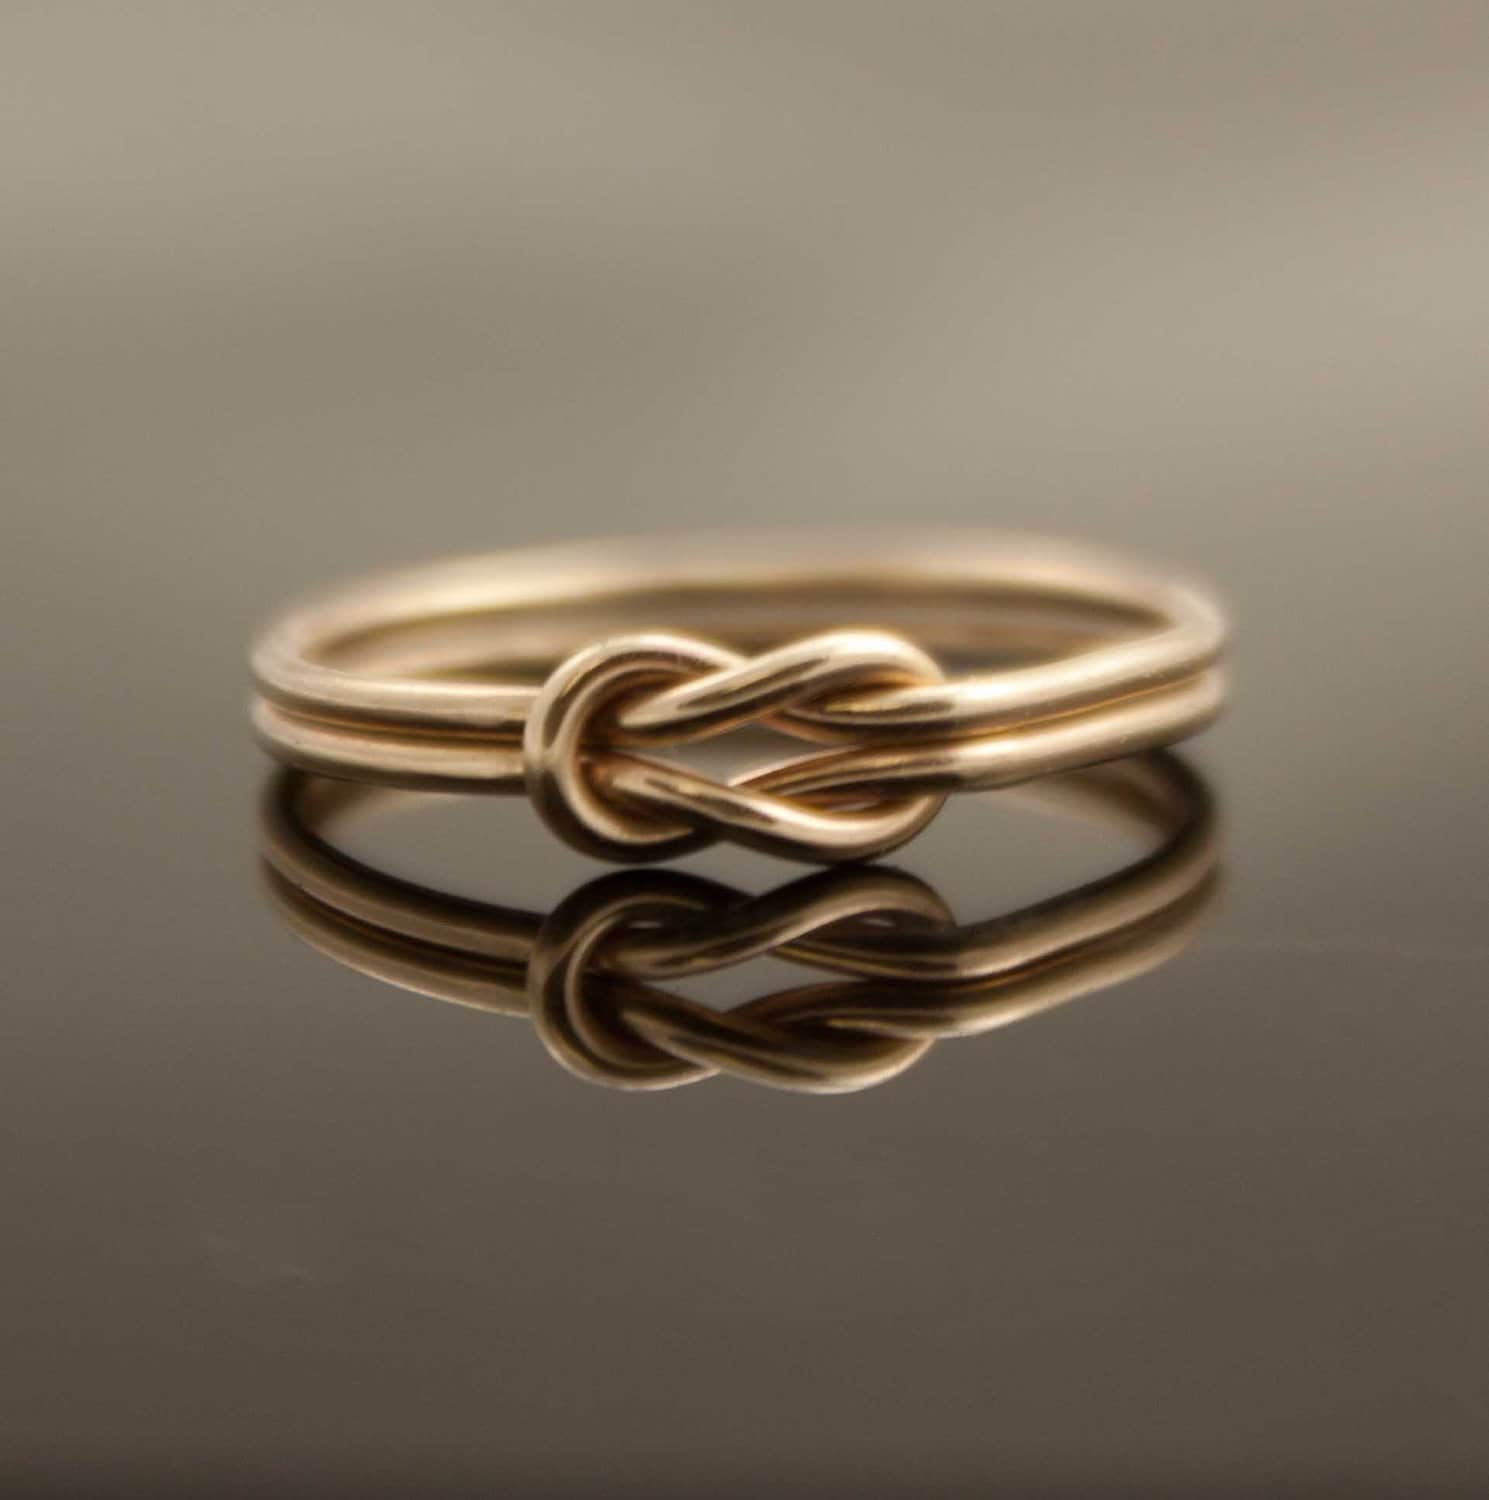 Solid 14K Gold Infinity knot ring Hug ring Alternate wedding ring, engagement, promise ring or friendship sister ring committment Yellow